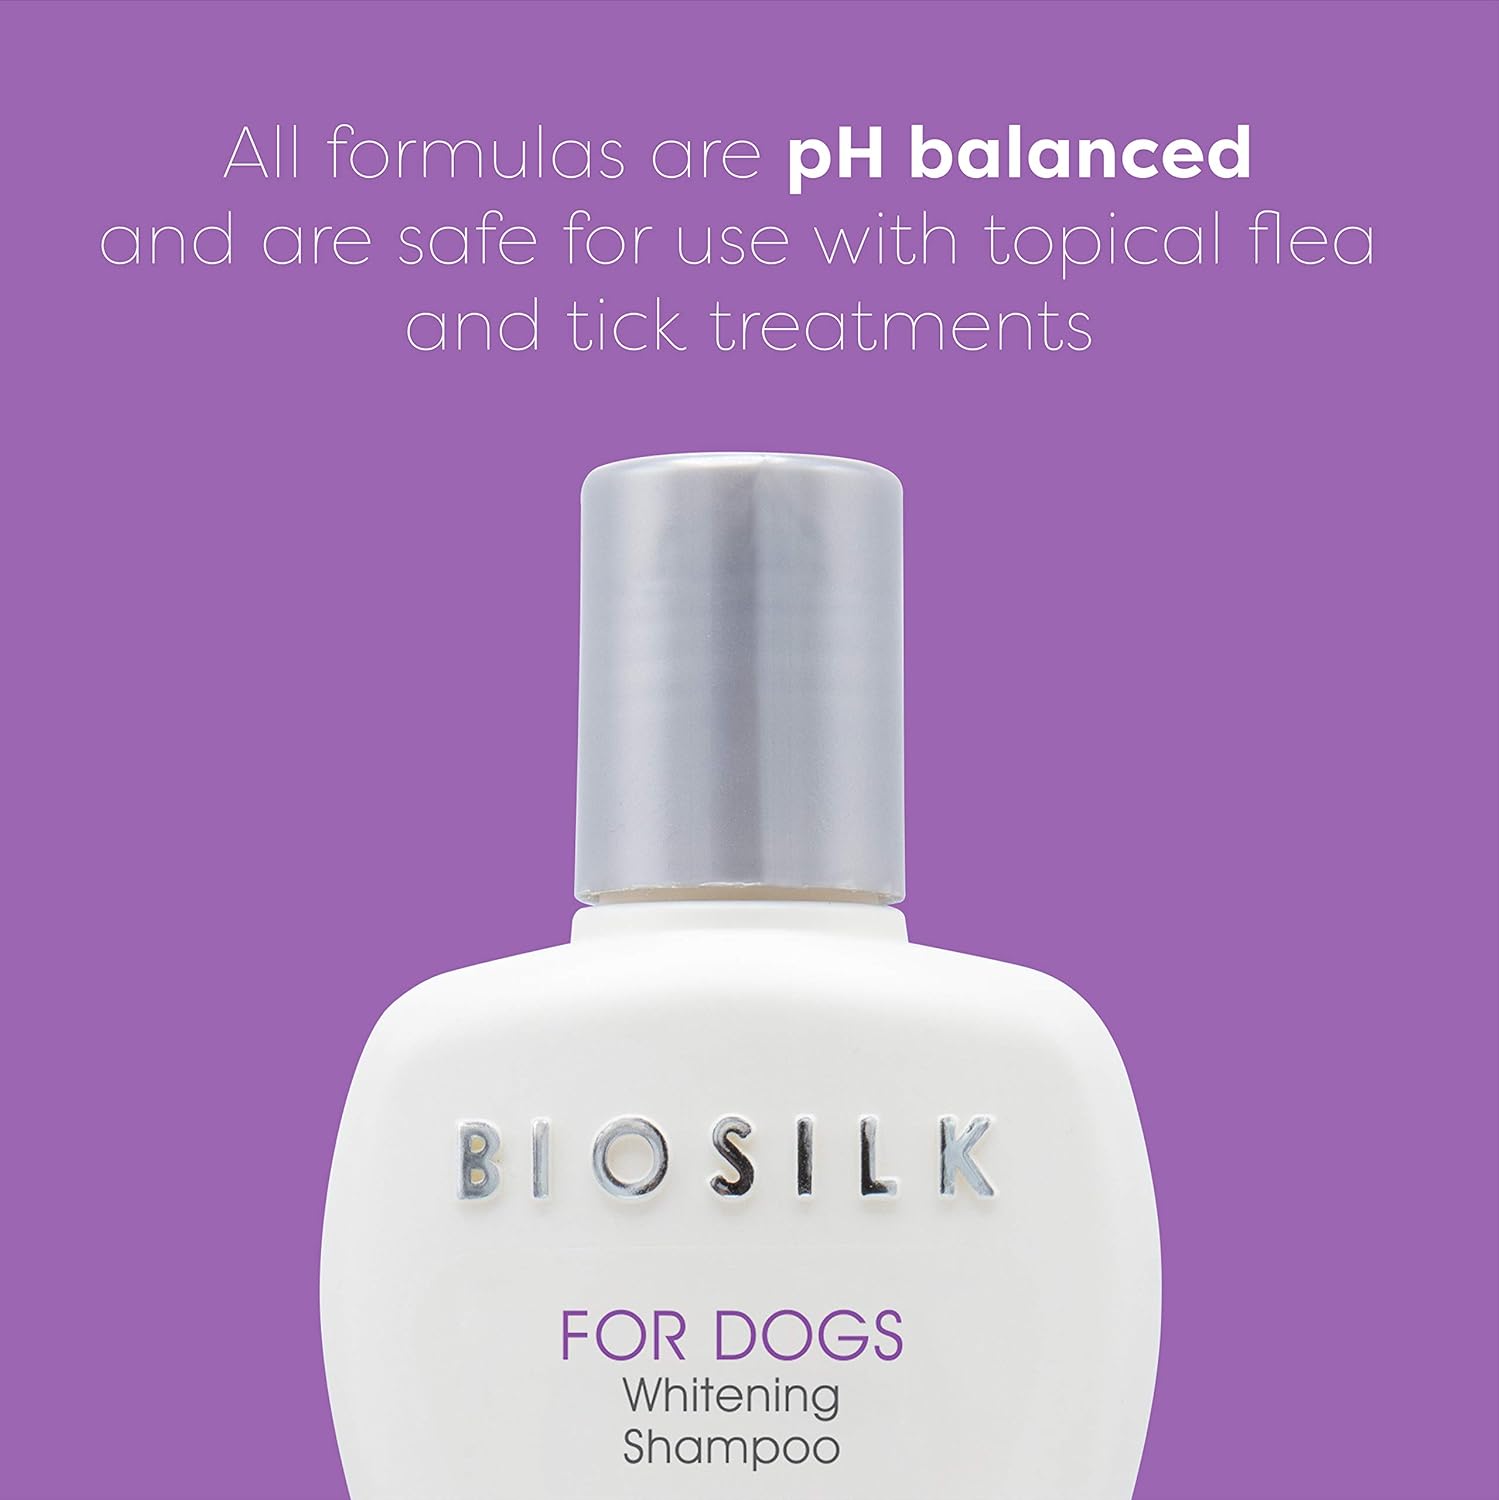 BioSilk for Dogs Silk Therapy Whitening Shampoo | Best Brightening Dog Shampoo for White Dogs to Keep A Clean, White Coat, 12 Oz Shampoo Bottle for All Dogs, Pack of 2